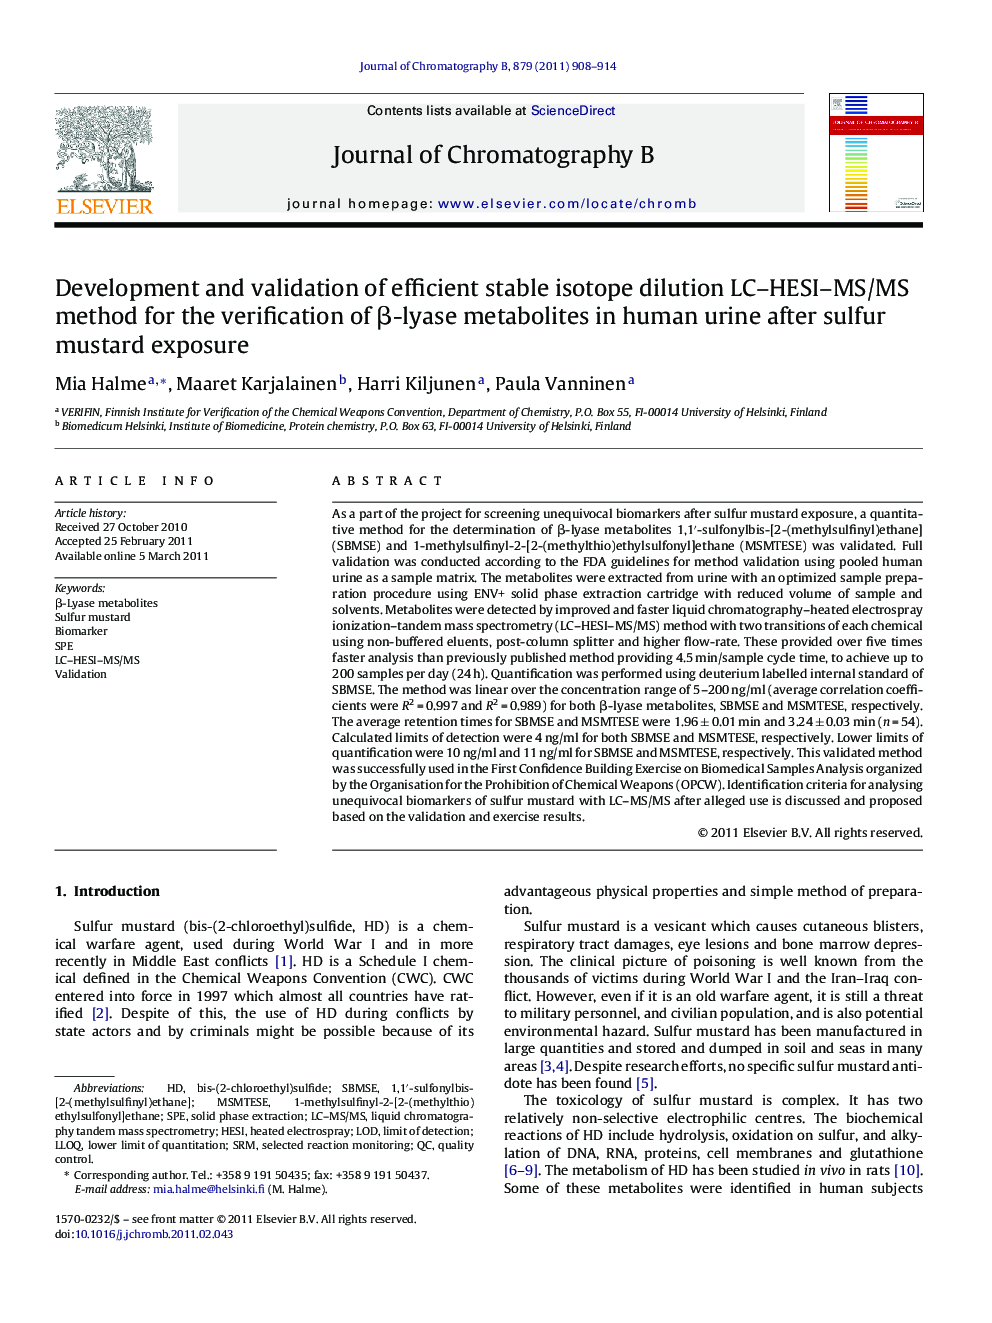 Development and validation of efficient stable isotope dilution LC–HESI–MS/MS method for the verification of β-lyase metabolites in human urine after sulfur mustard exposure